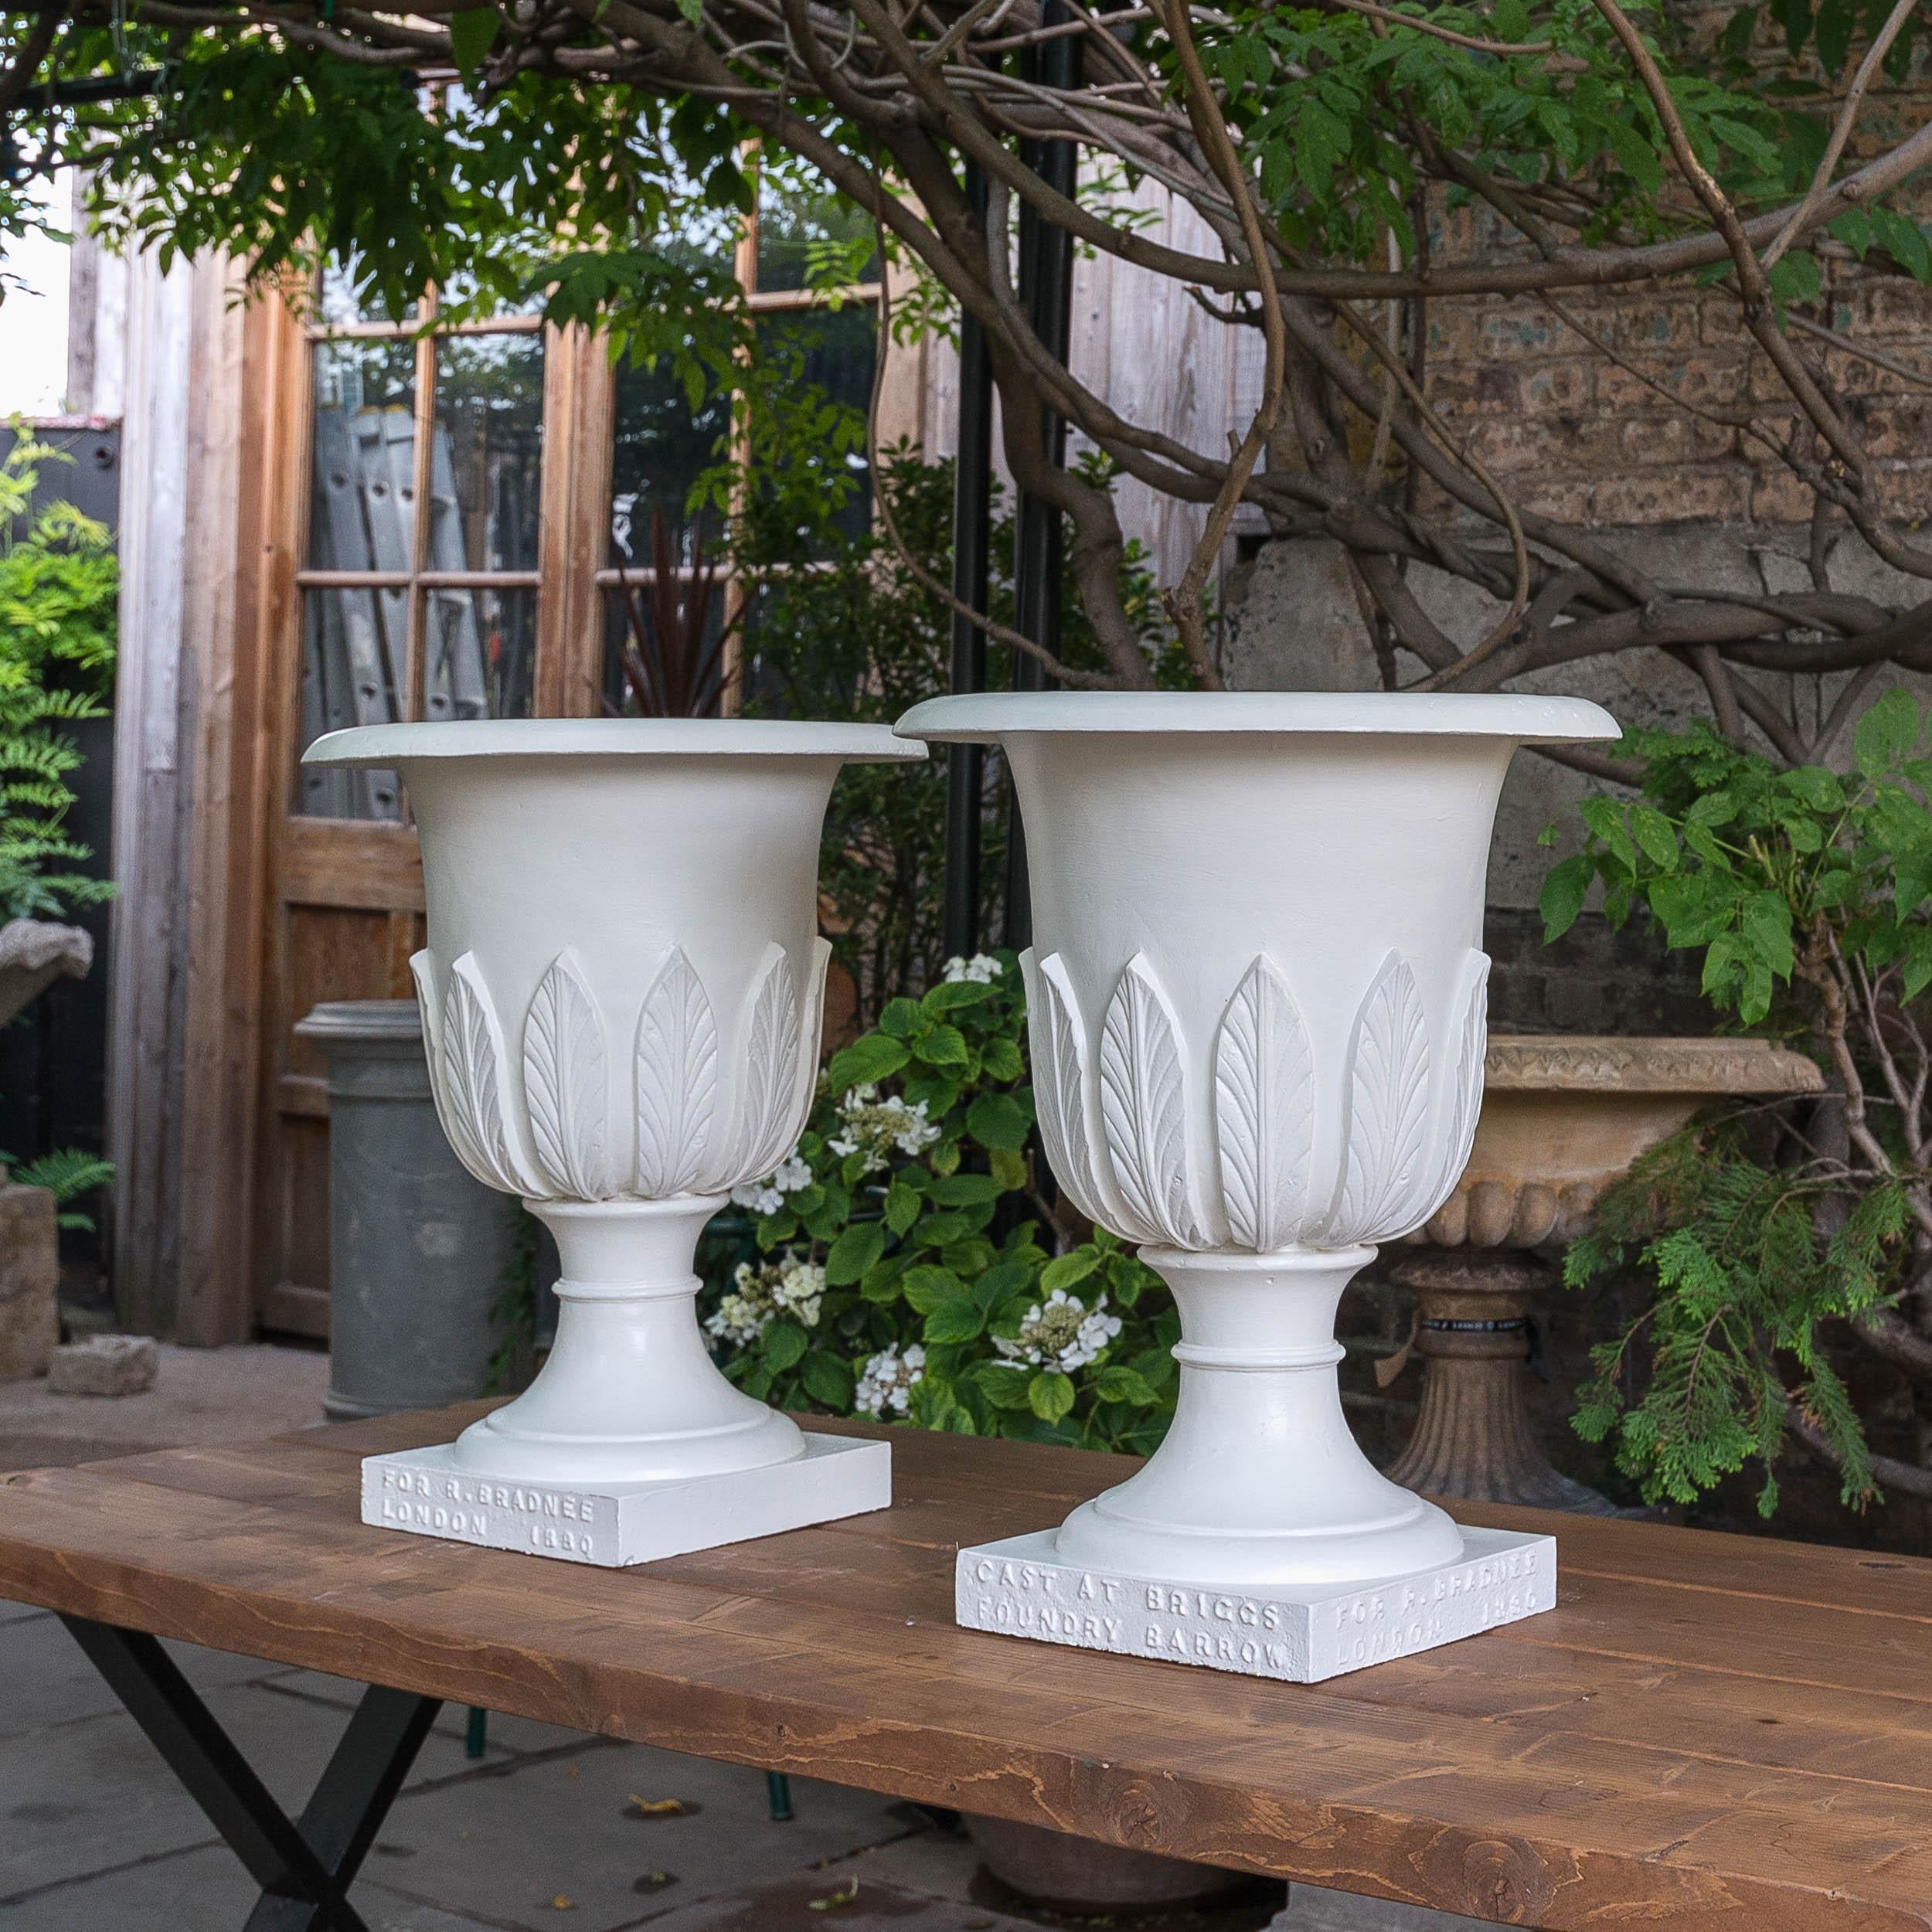 A pair of Victorian cast iron Campana urns, dated 1880, the body with stiff-leaf decoration, the plinth bases with embossed text, 'CAST AT BRIGGS FOUNDRY BARROW', 'FOR R.BRADNEE LONDON 1880'. Repainted.